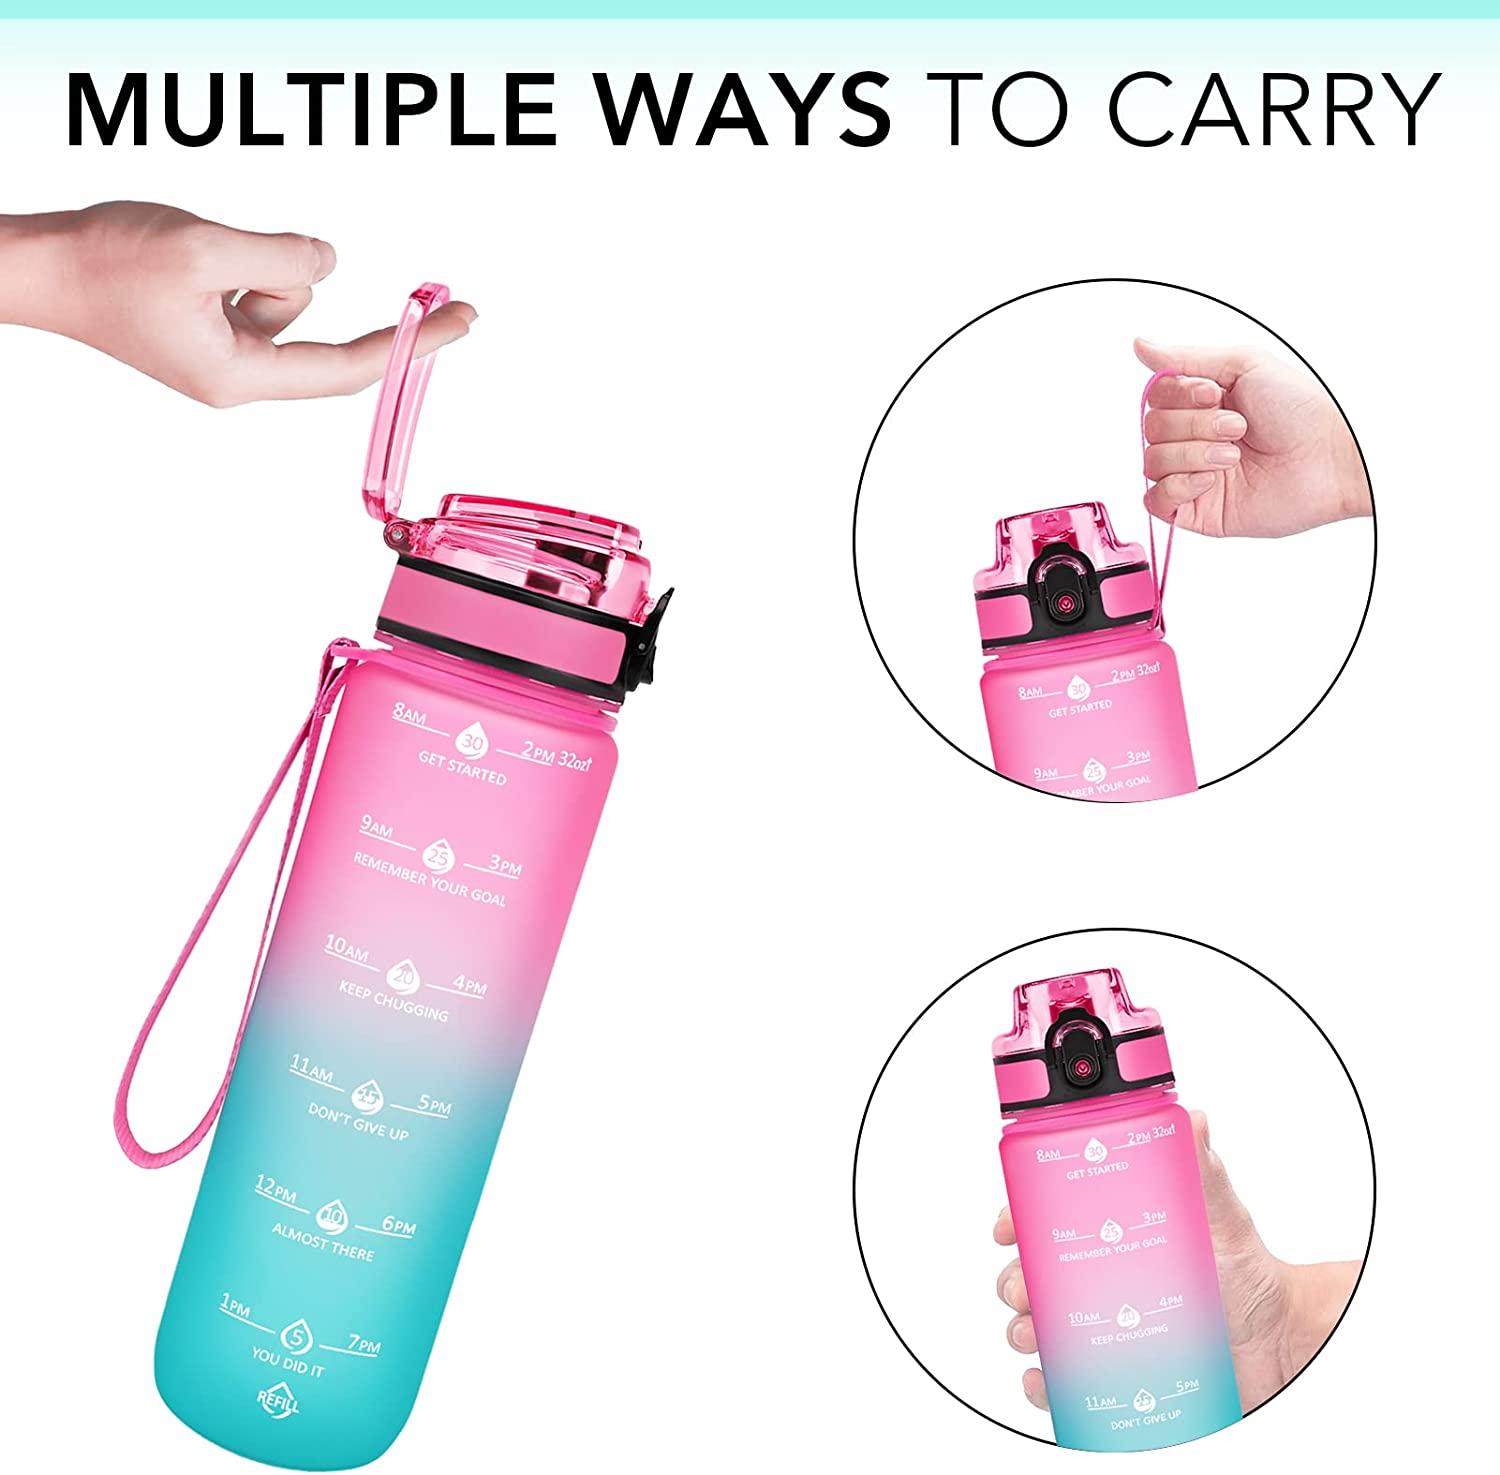 GOSWAG Water Bottle With Sleeve, 32 oz Insulated Sports Water Bottle with  Straw and Carrying Strap, Leak Proof Bpa Free & No Swe